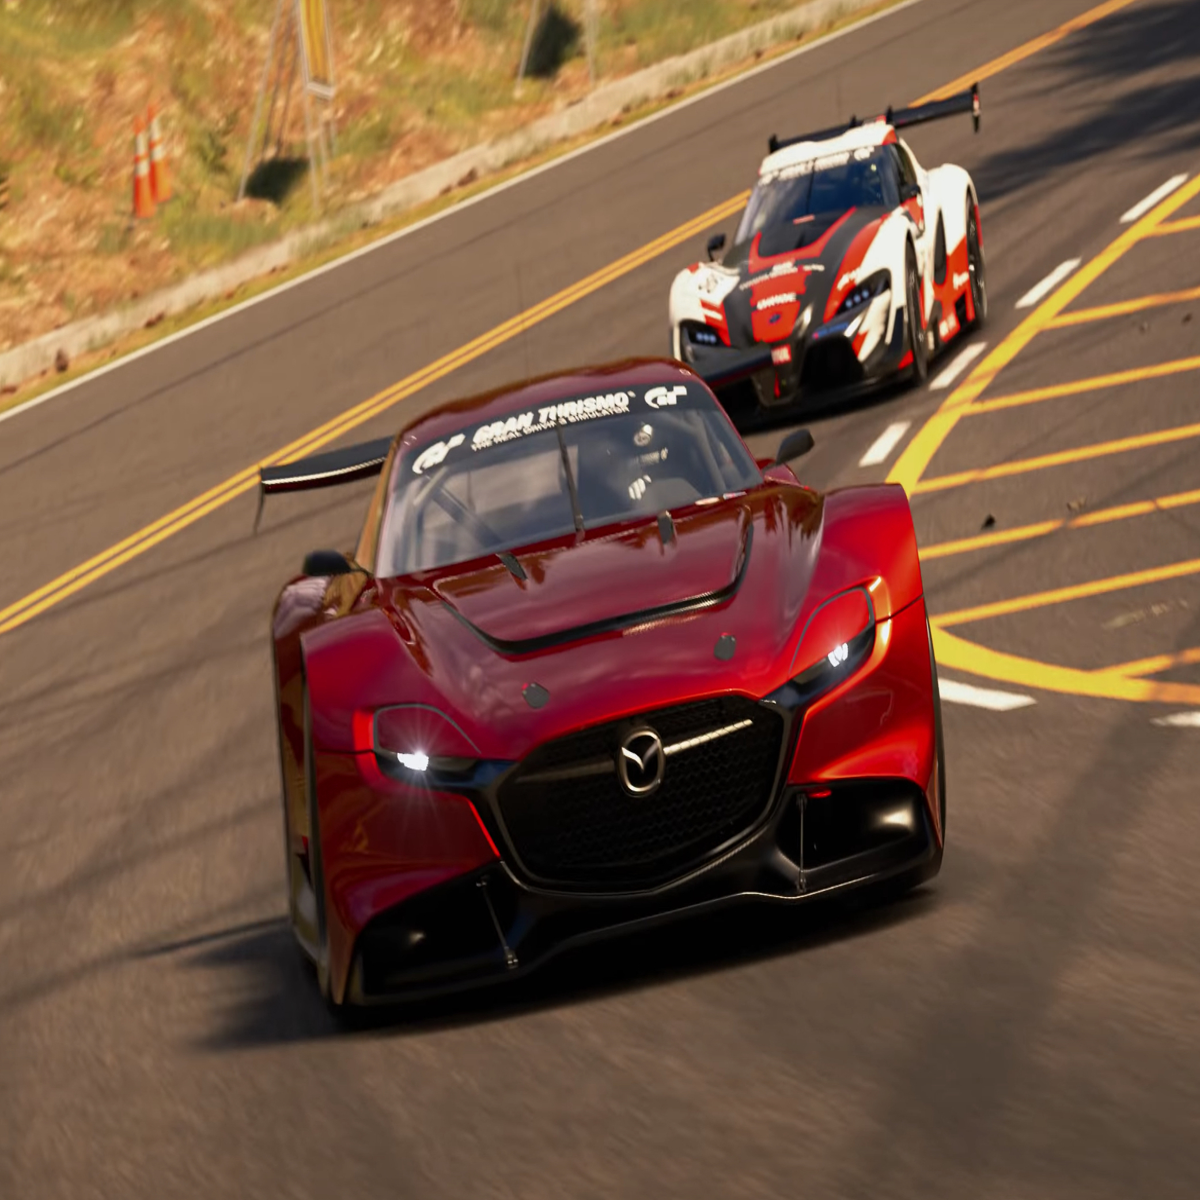 Gran Turismo 7 is still being review bombed by angry fans